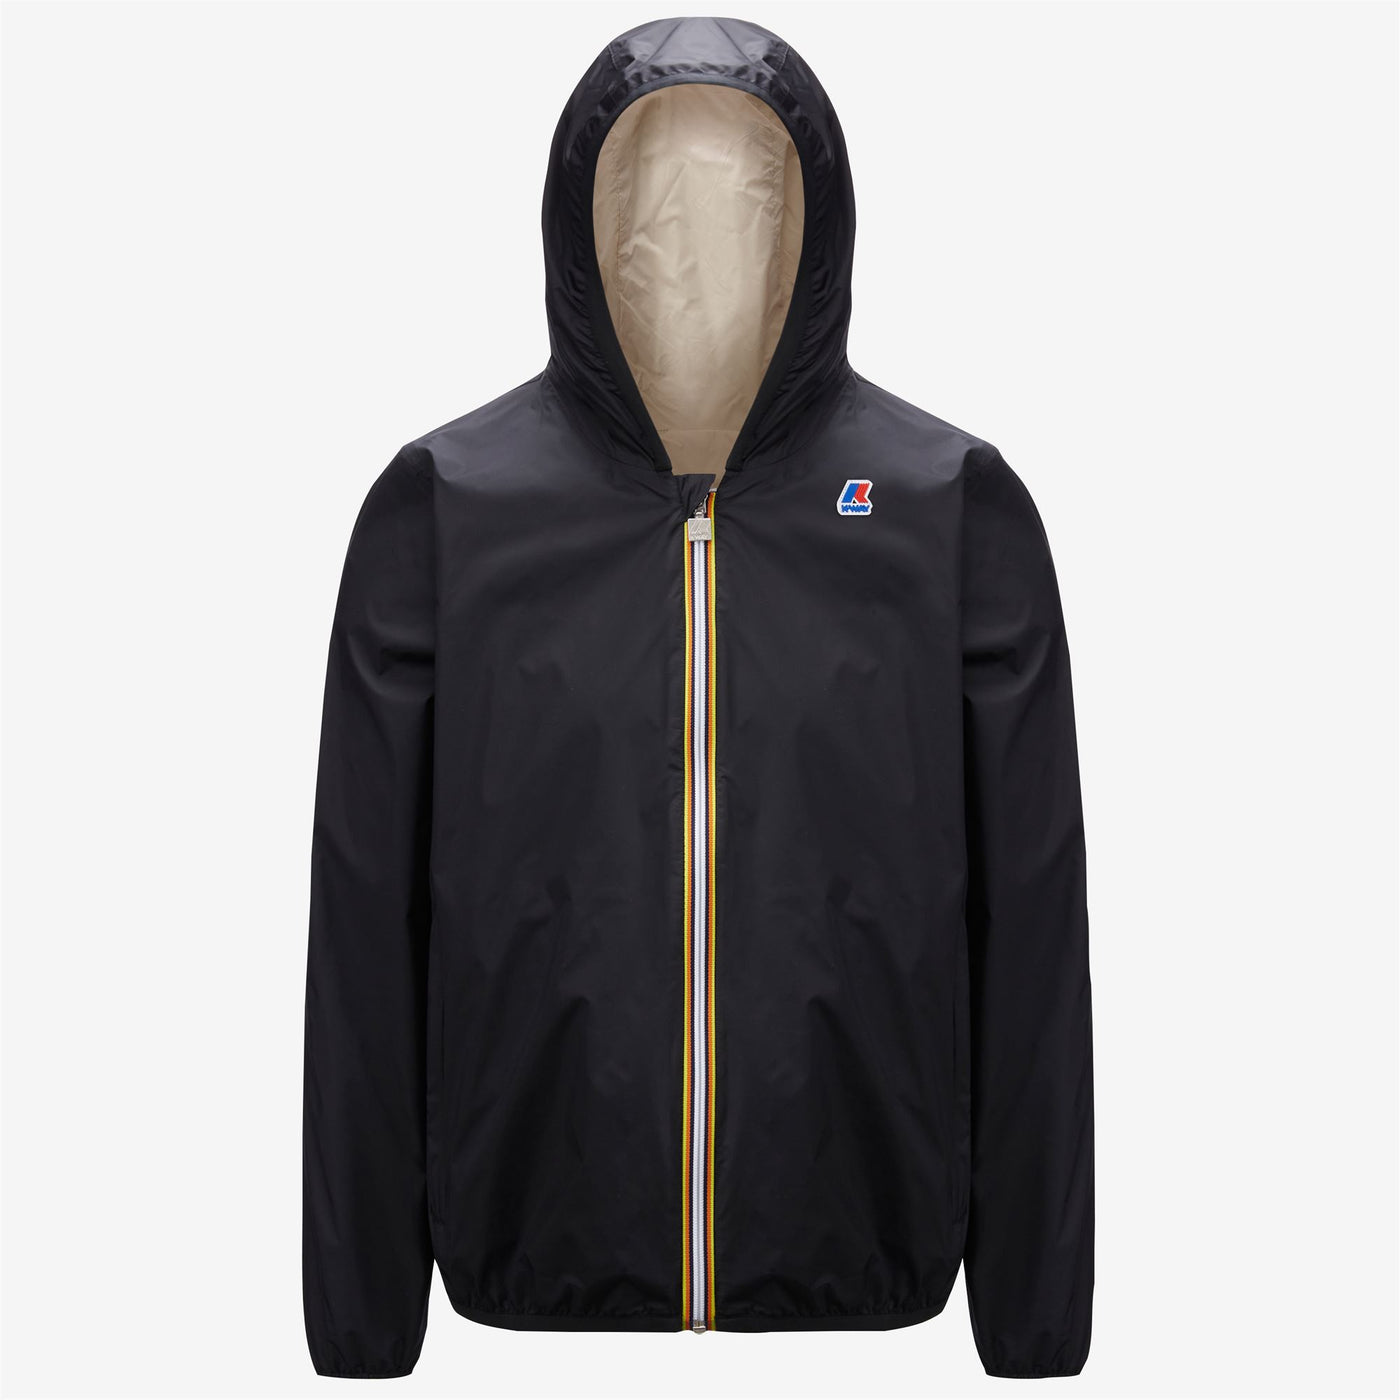 Jackets Man JACQUES PLUS.2 DOUBLE Short BLACK PURE - BEIGE GREY | kway Dressed Front (jpg Rgb)	